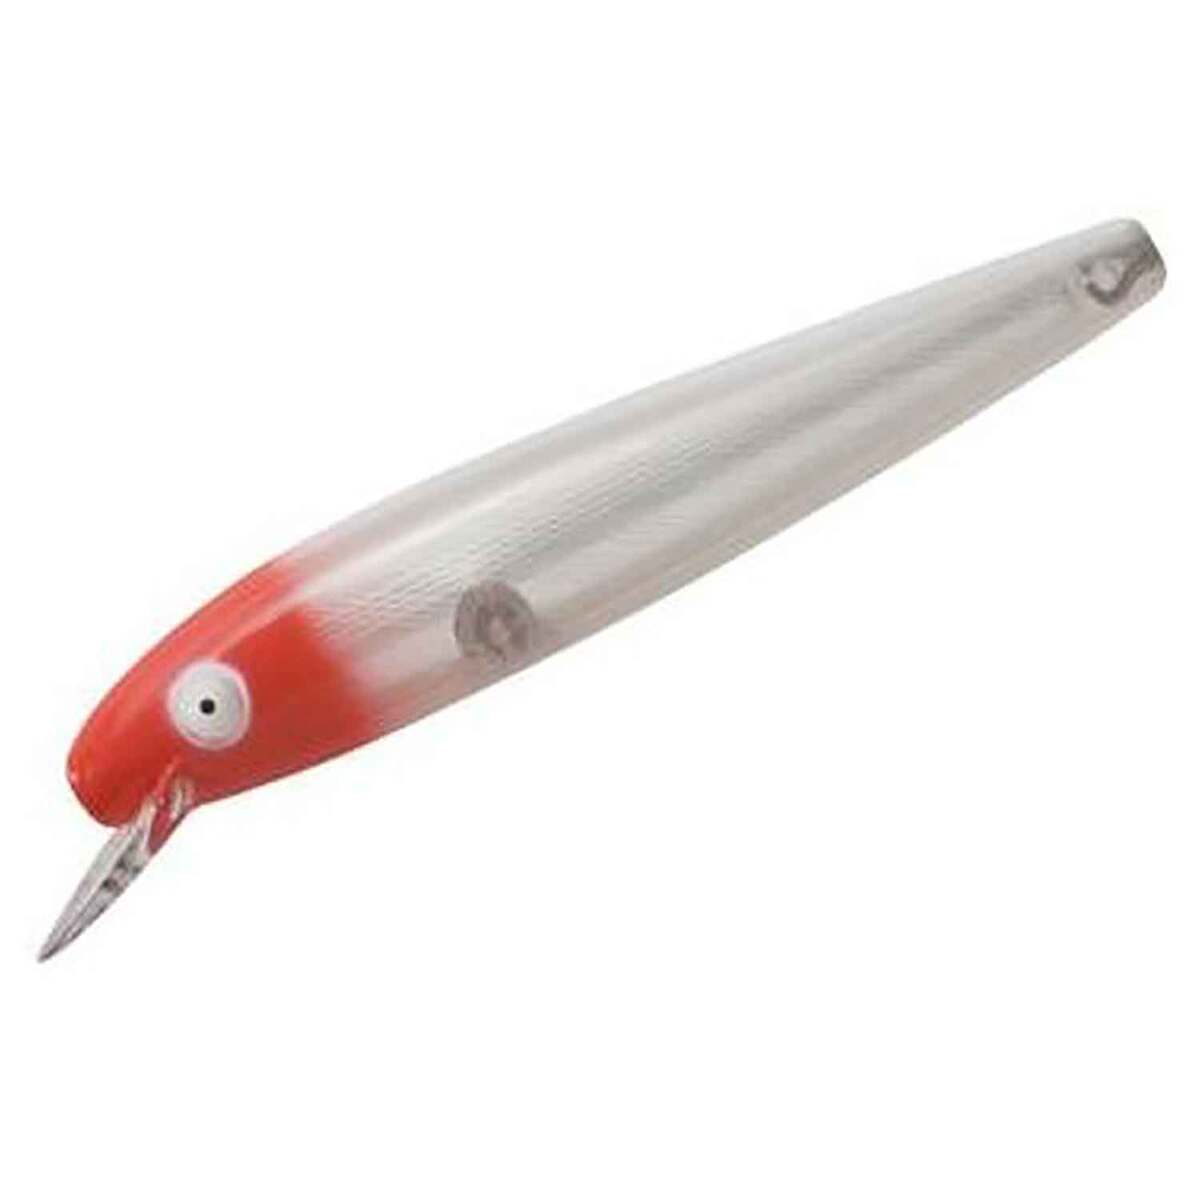 Bomber Wind Cheater Saltwater Lure, Silver/Red Head